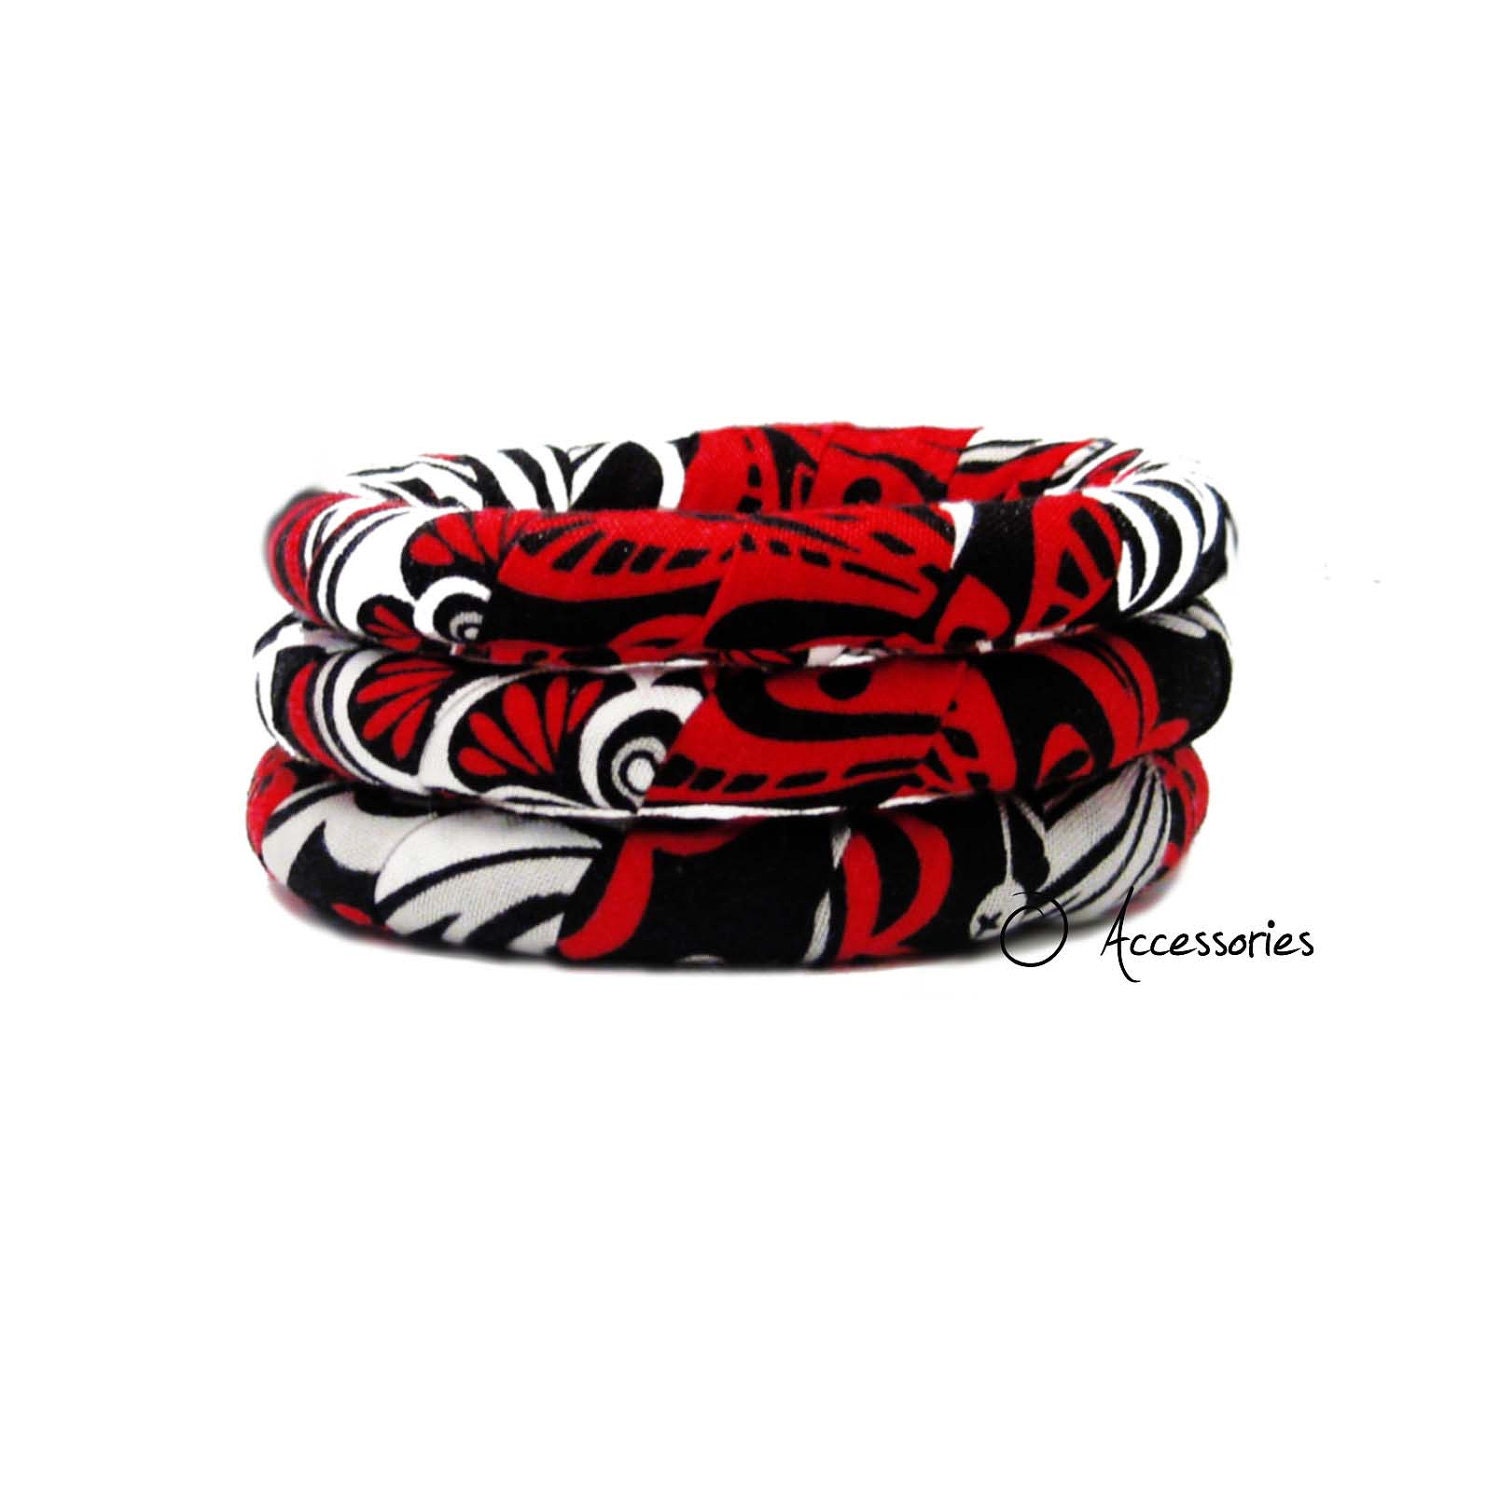 Black, White and Red Printed Fabric Wrapped Bangle Bracelet, Cotton, Set of 3 - OAccessories